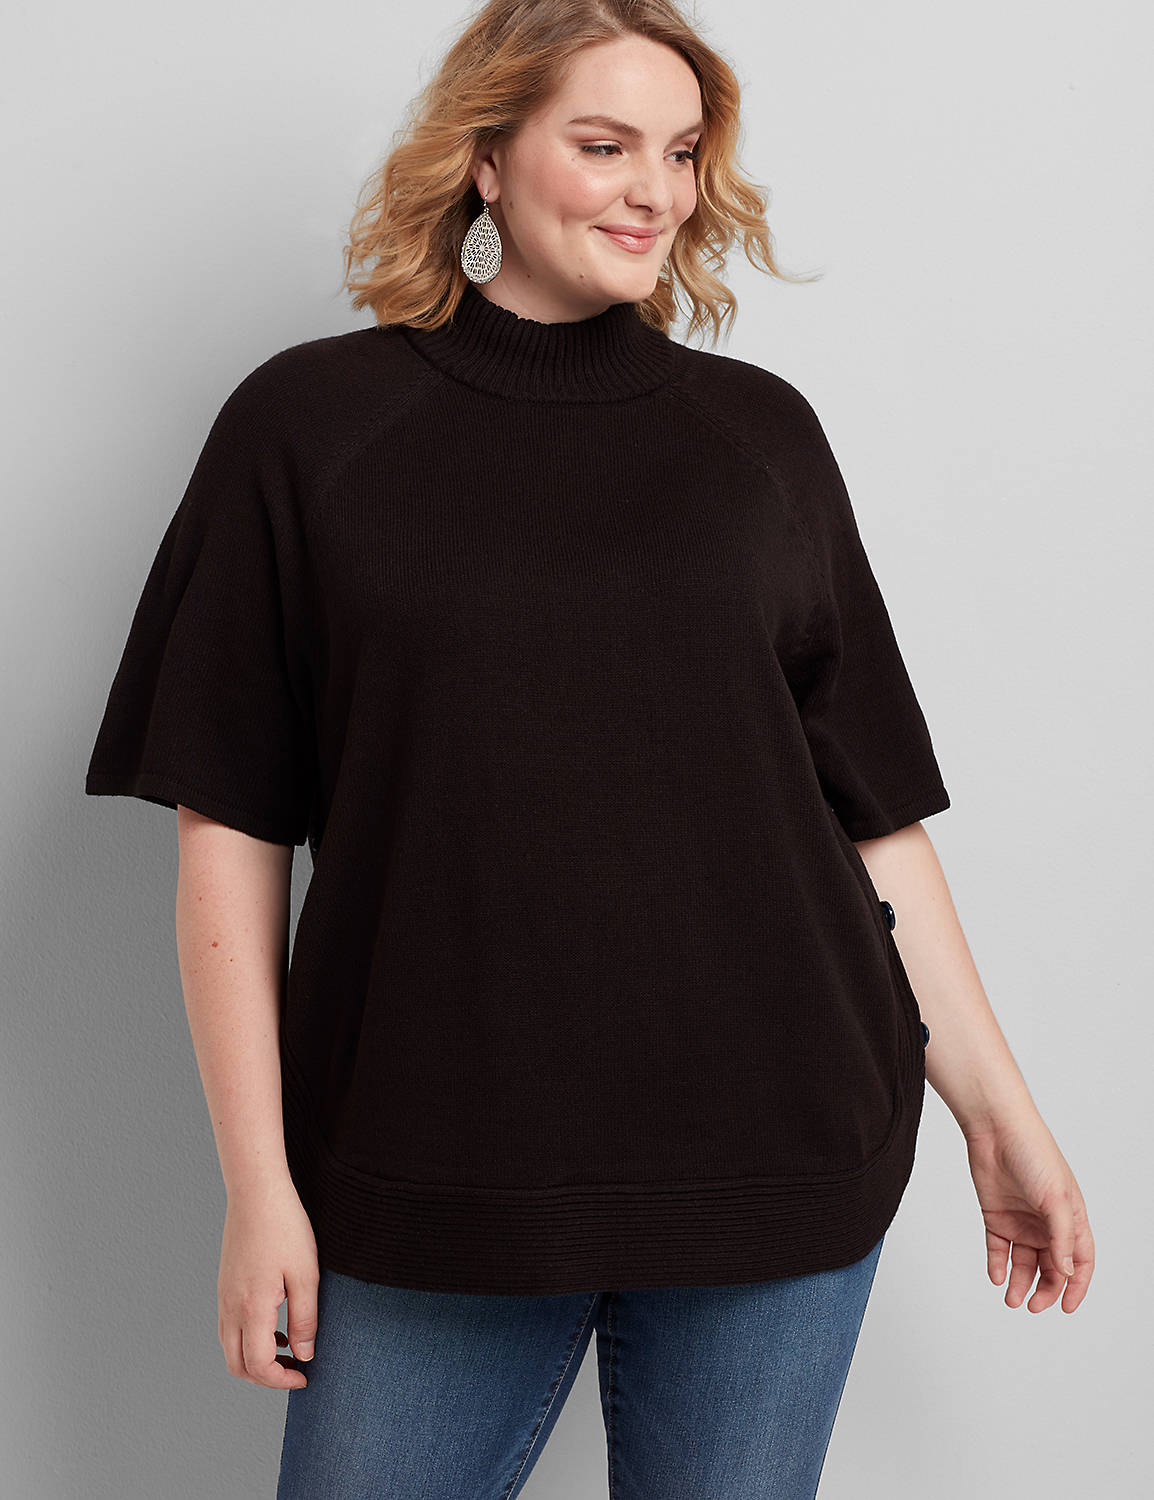 SHORT SLEEVE MOCK NECK BUTTON SIDE PONCHO 1113568:Pitch Black LB 1000322:22/24 Product Image 1